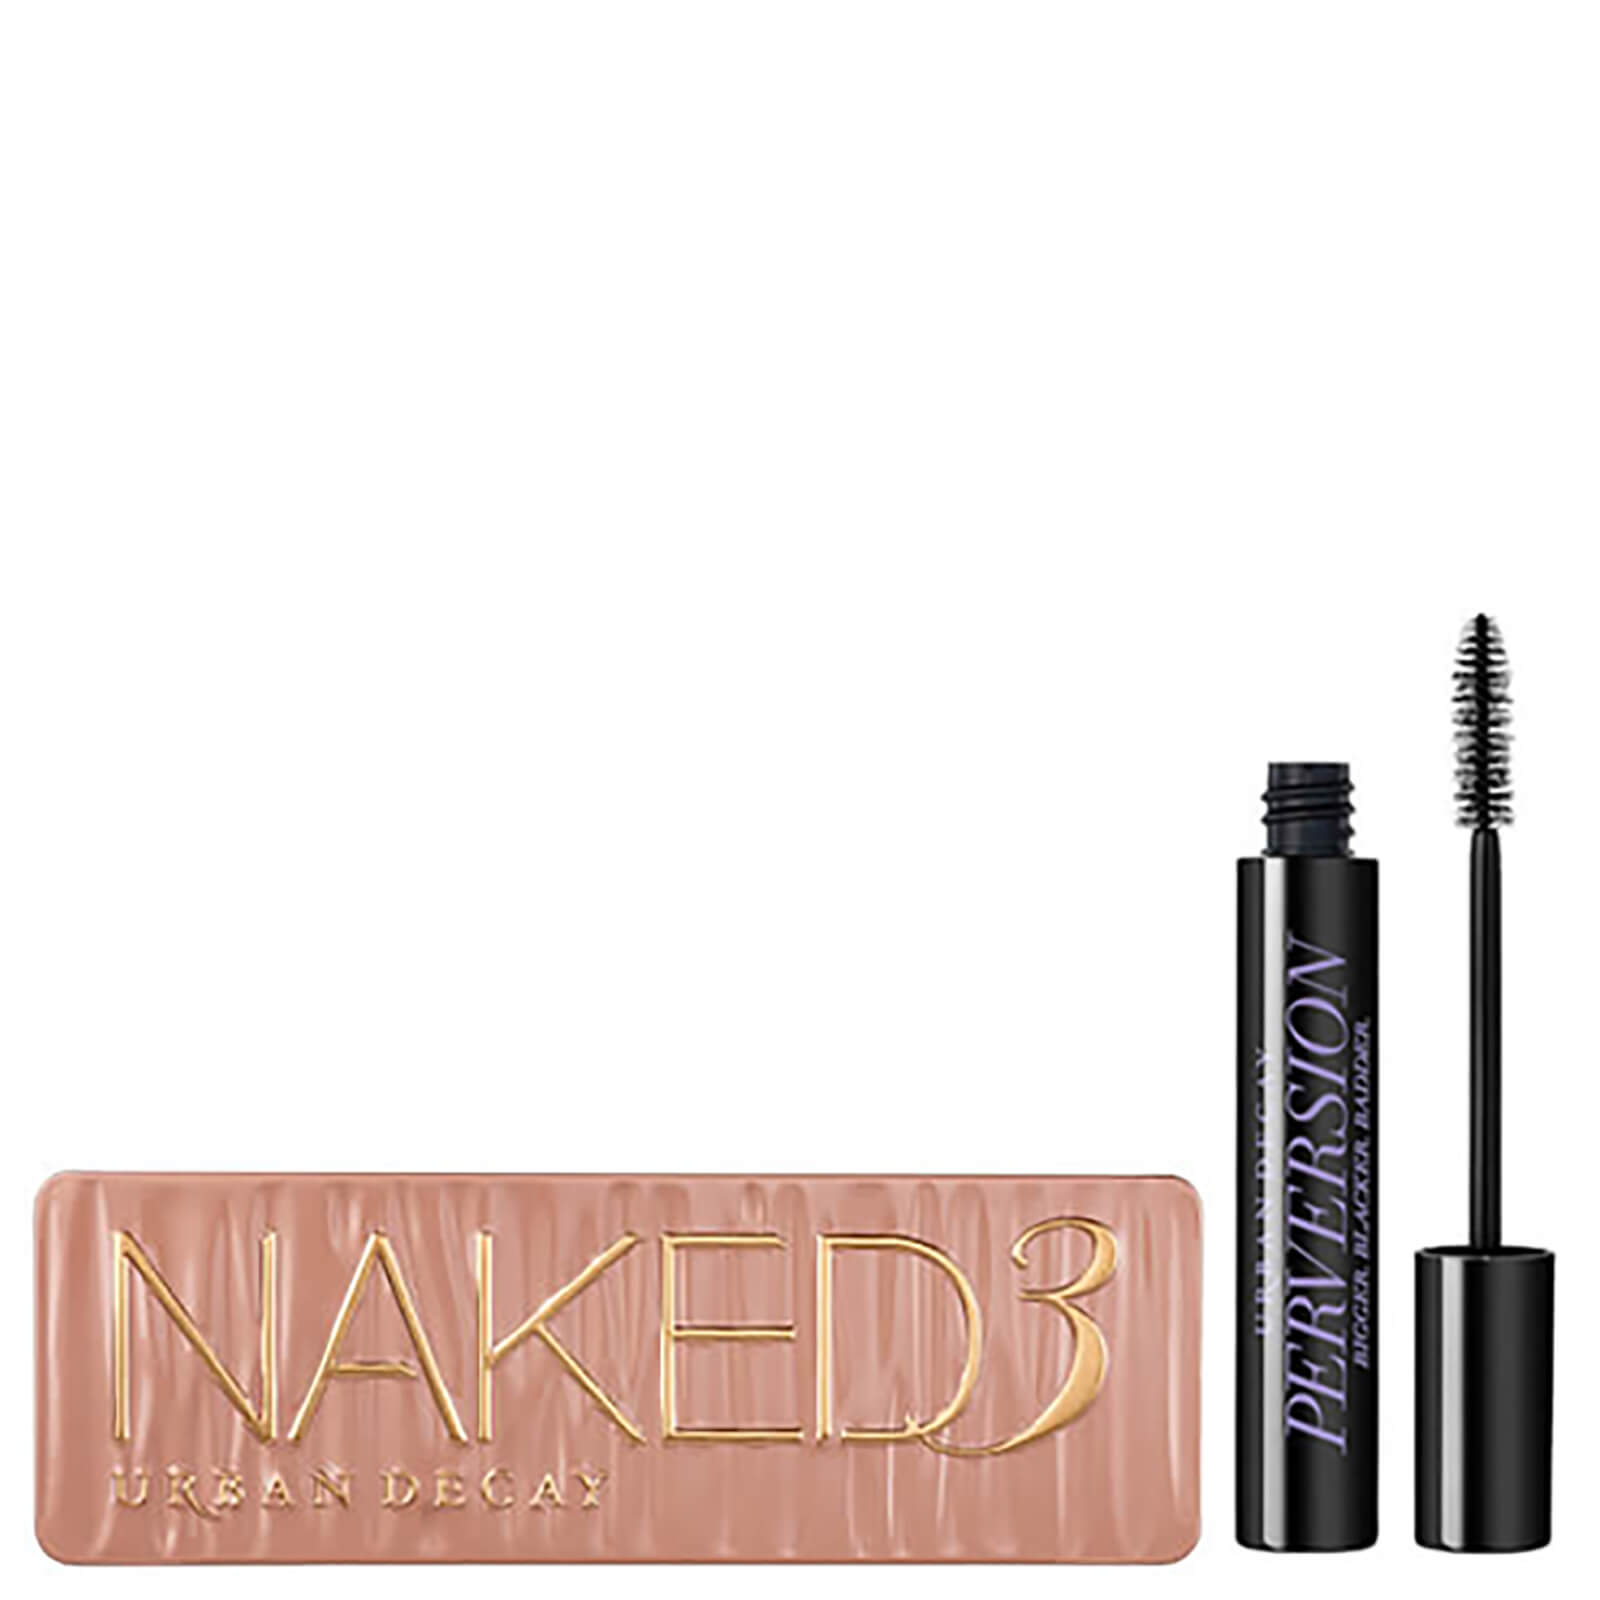 Urban Decay Naked 3 Palette and Mascara Bundle von Urban Decay